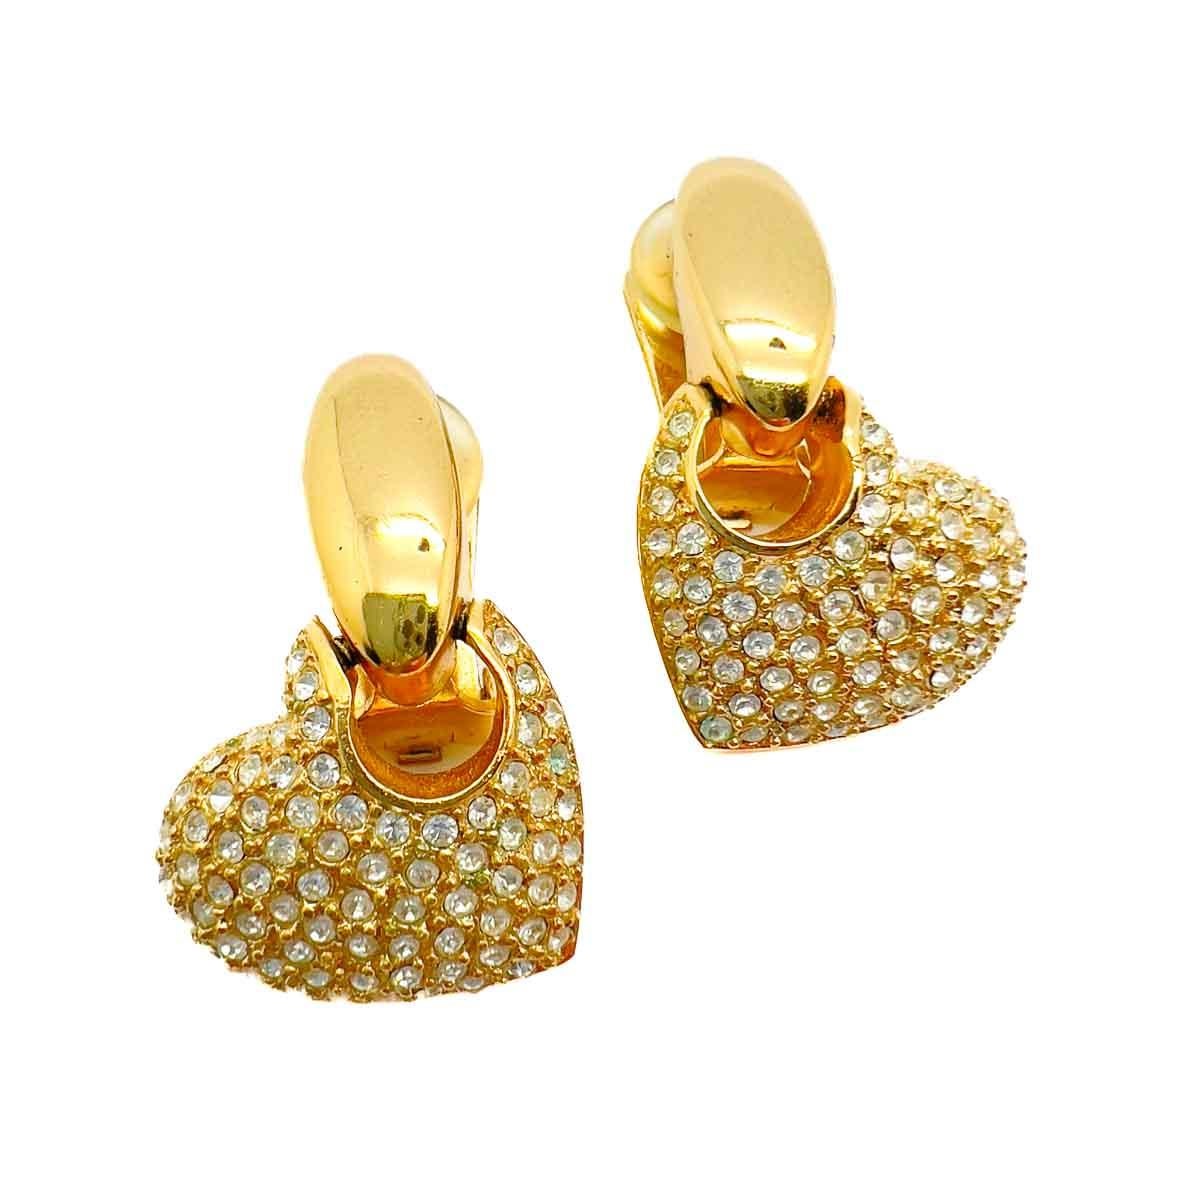 A pair of Vintage Grossé Heart Earrings. The best of both worlds with lustrous gold and crystals in their winning combination. A chic and timeless addition to your jewel repertoire.
From modernist to centuries old styles, premiere German costume